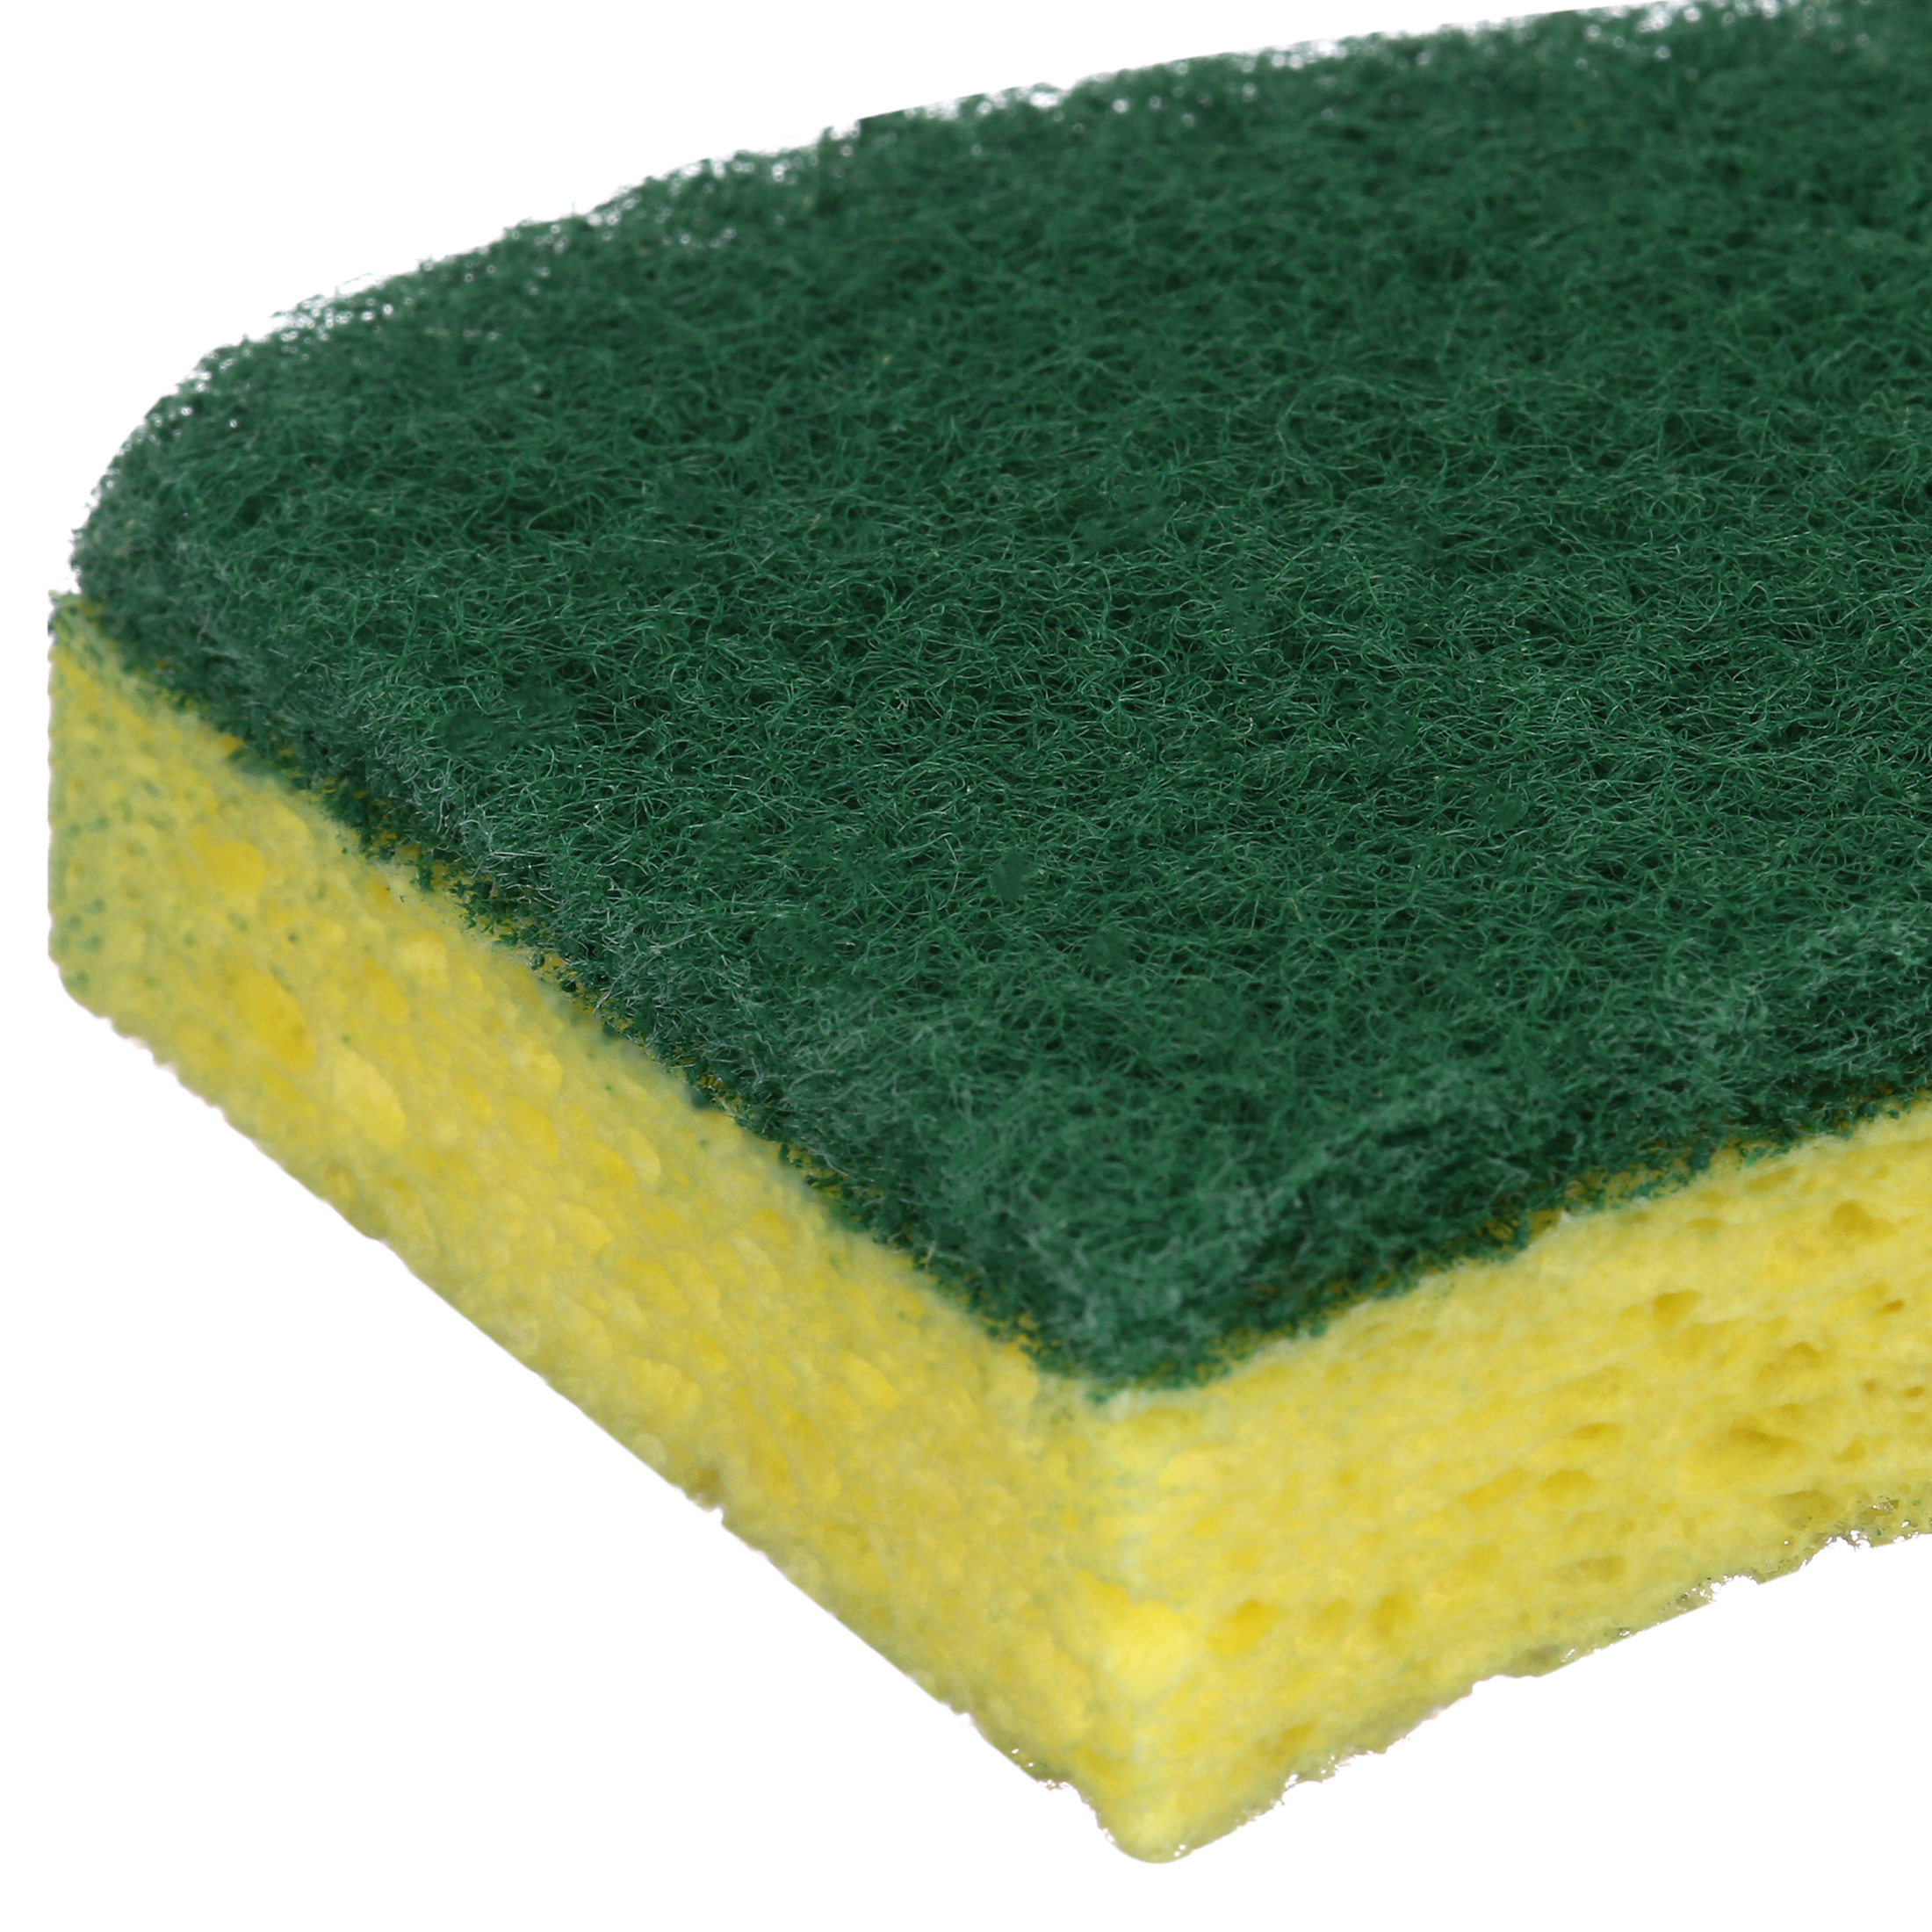 Great Value Heavy Duty Scrub Sponges, 4 Count - image 5 of 6